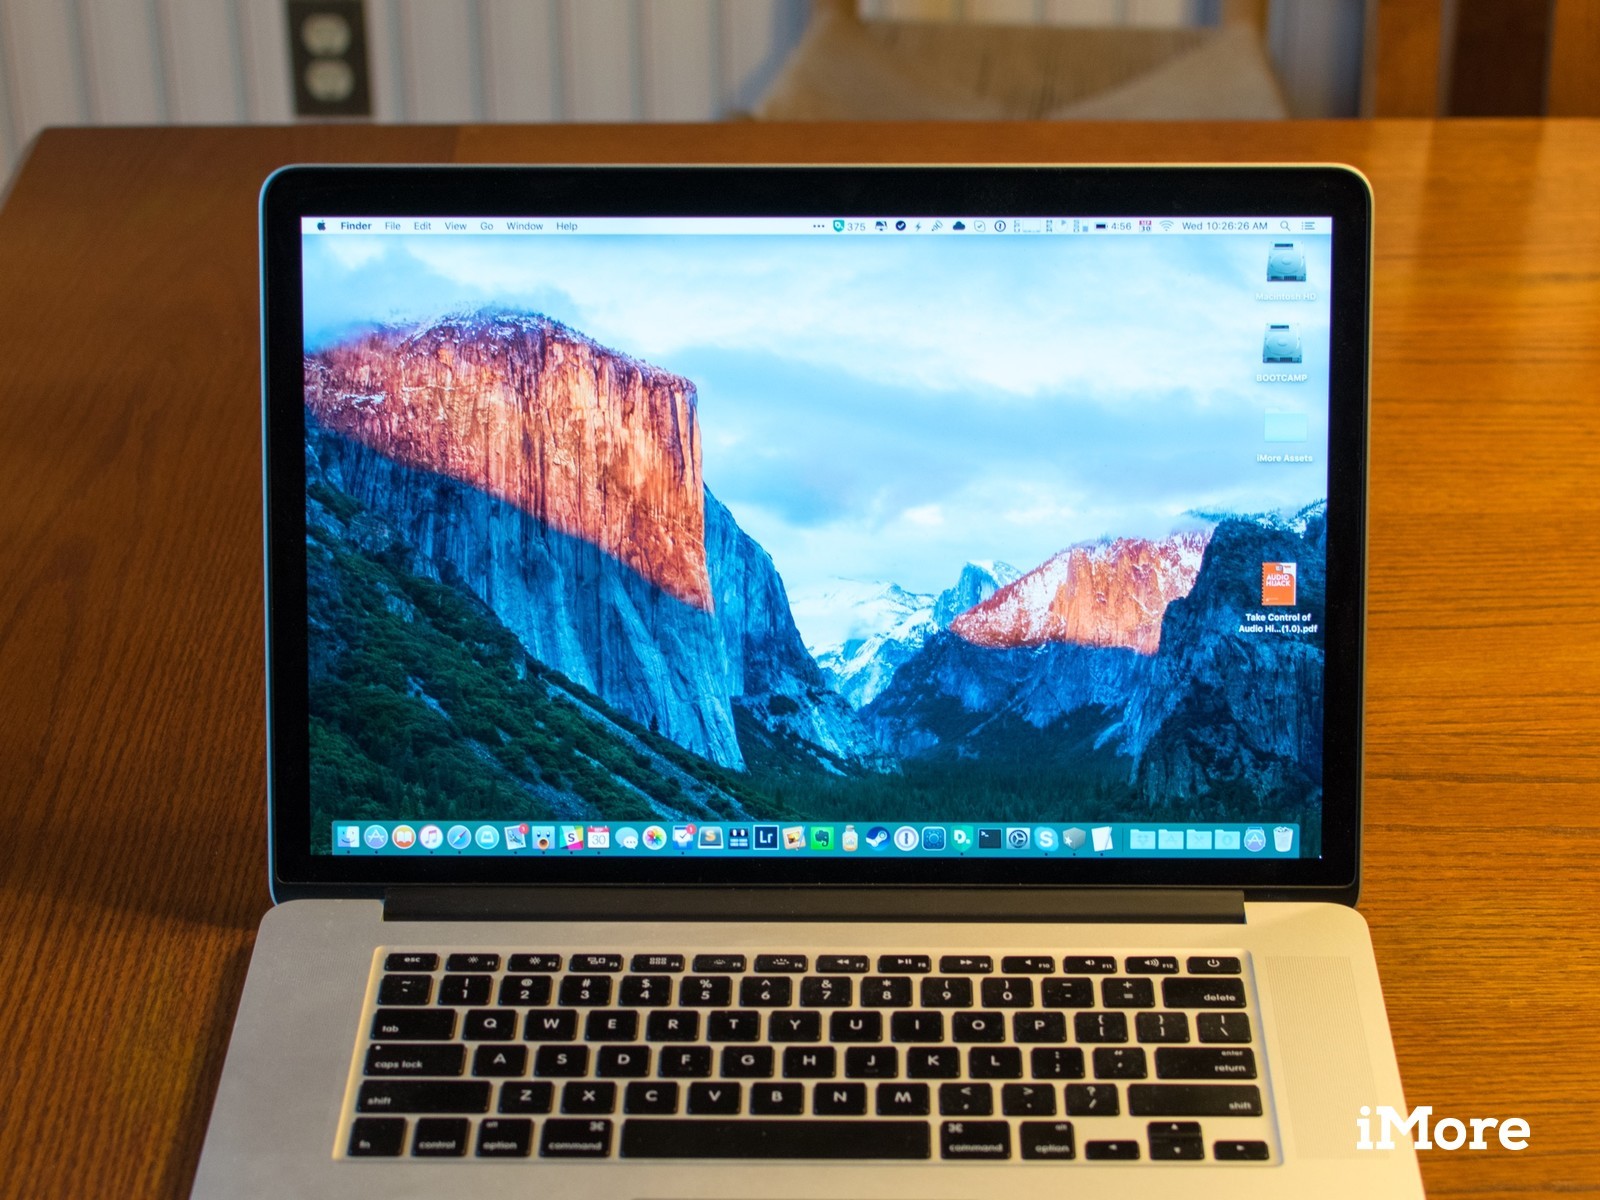 Download Os X Version 10.11 For Mac